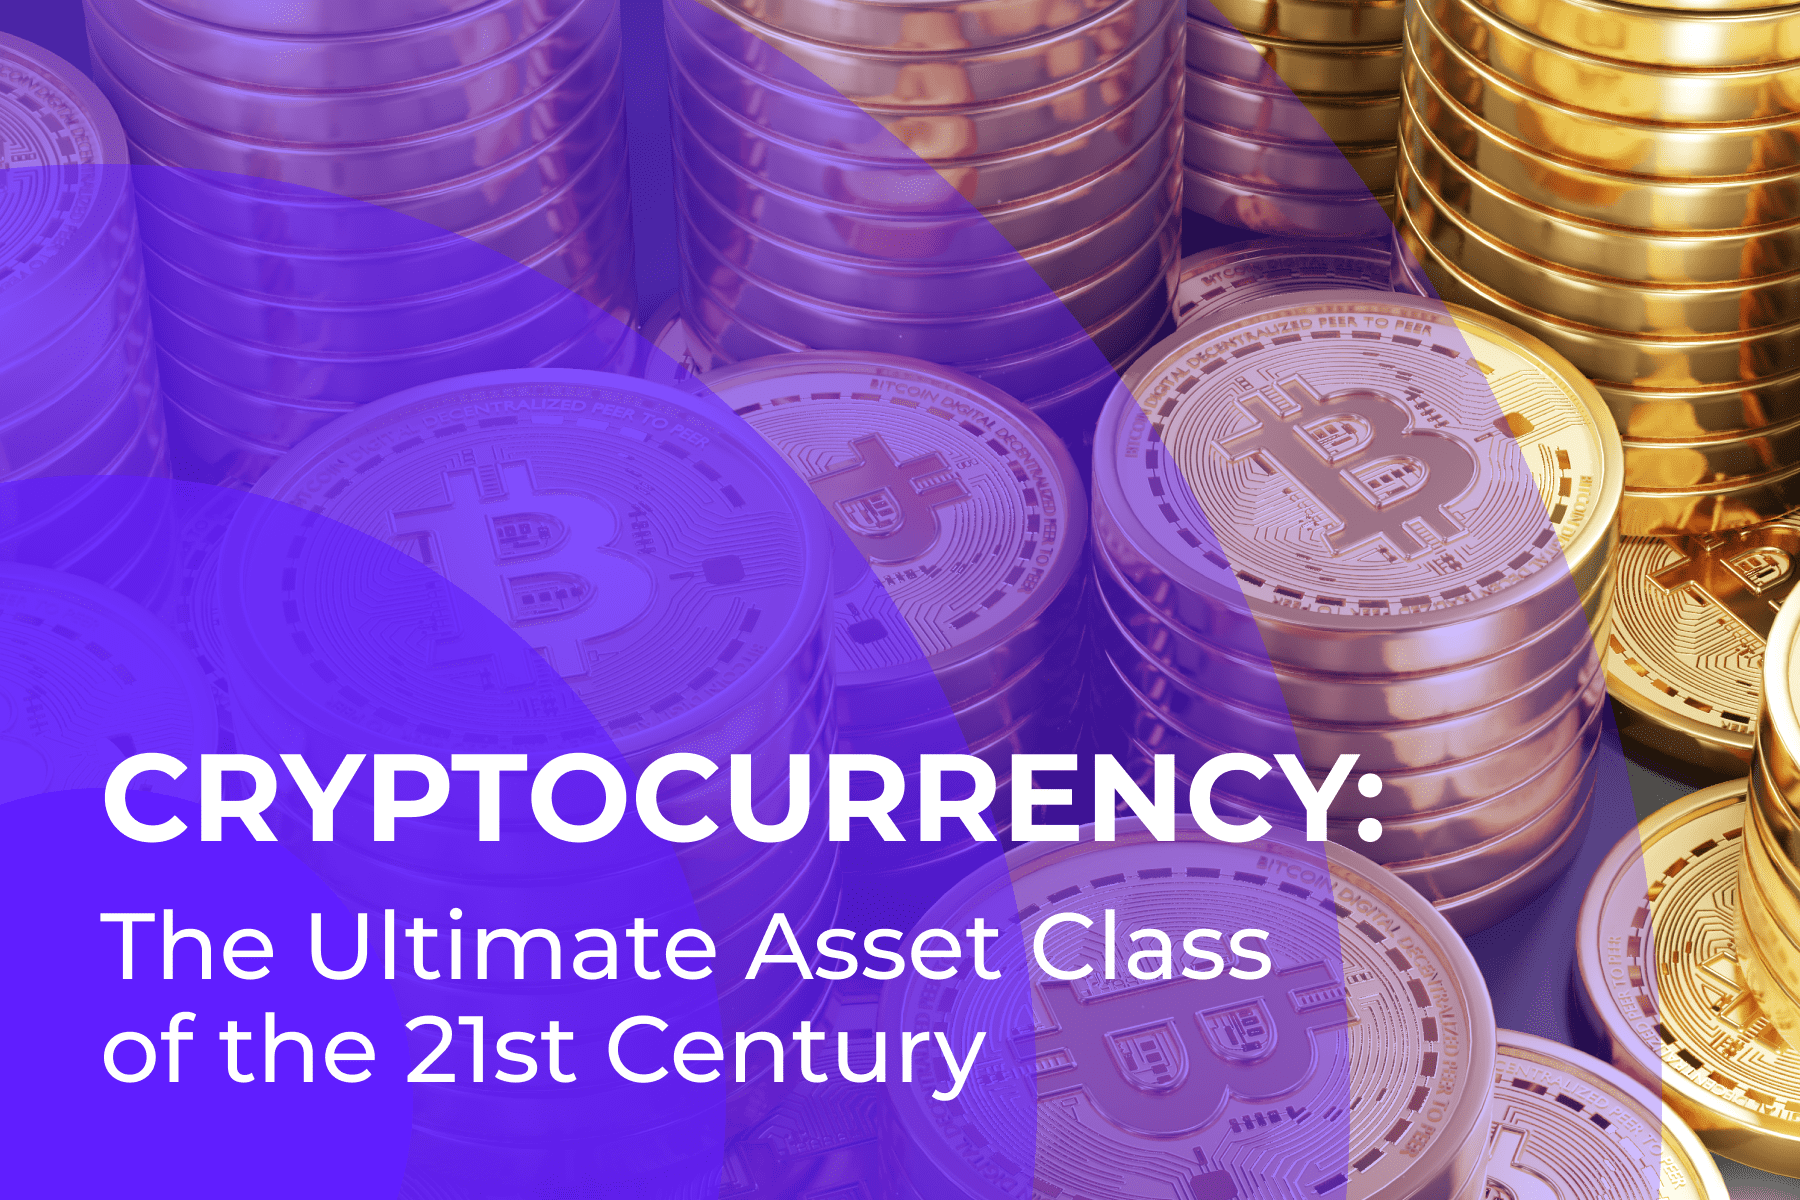 Cryptocurrency: The Ultimate Asset Class of the 21st Century